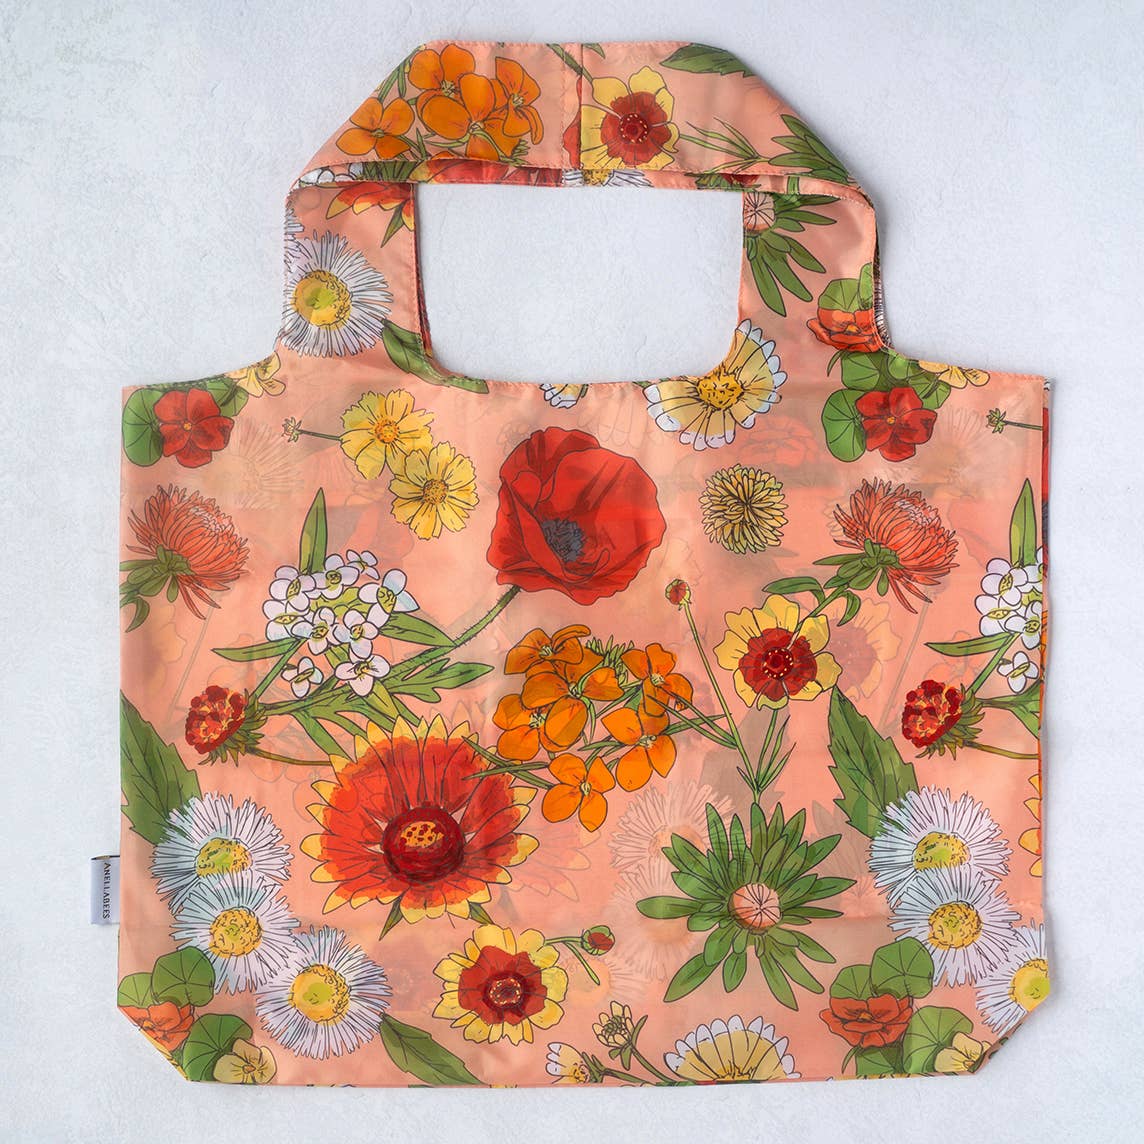 Valentine's Reusable Shopping Tote Bag - Poppy + Wildflowers